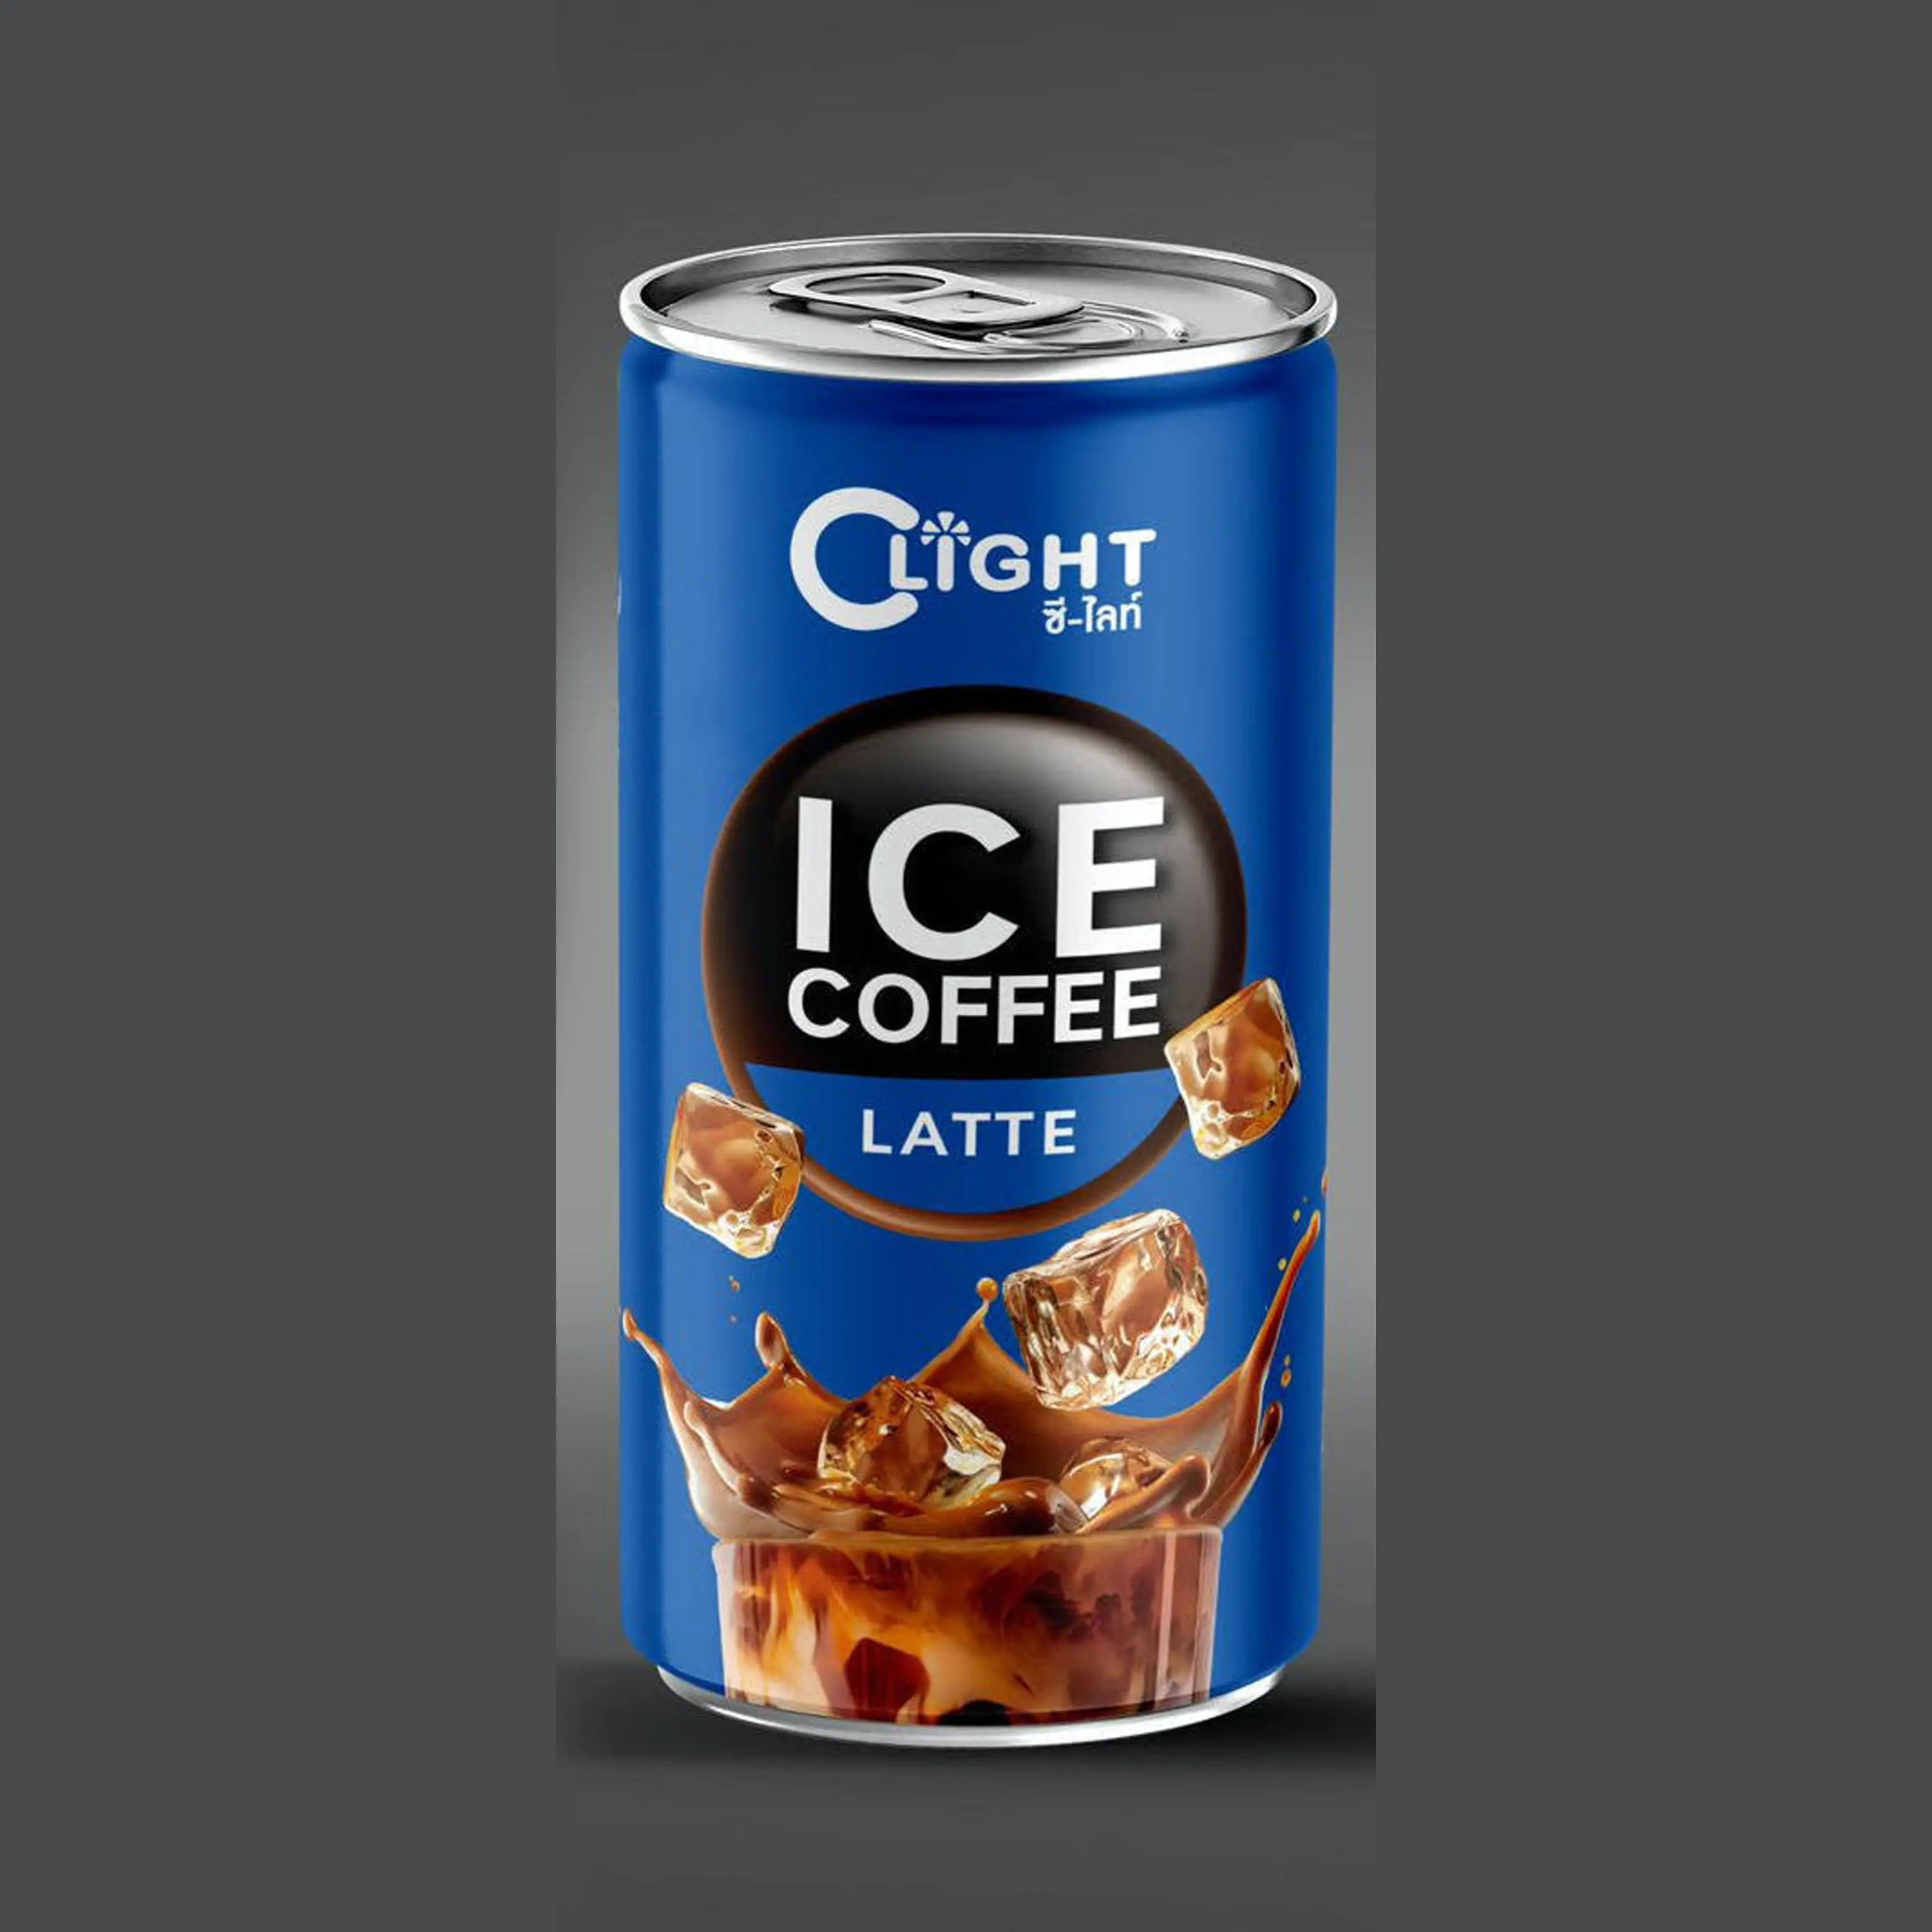 Instant Coffee Ready Drink Latte canned 180ml C-Light brand. Made in Thailand   product of Thailand